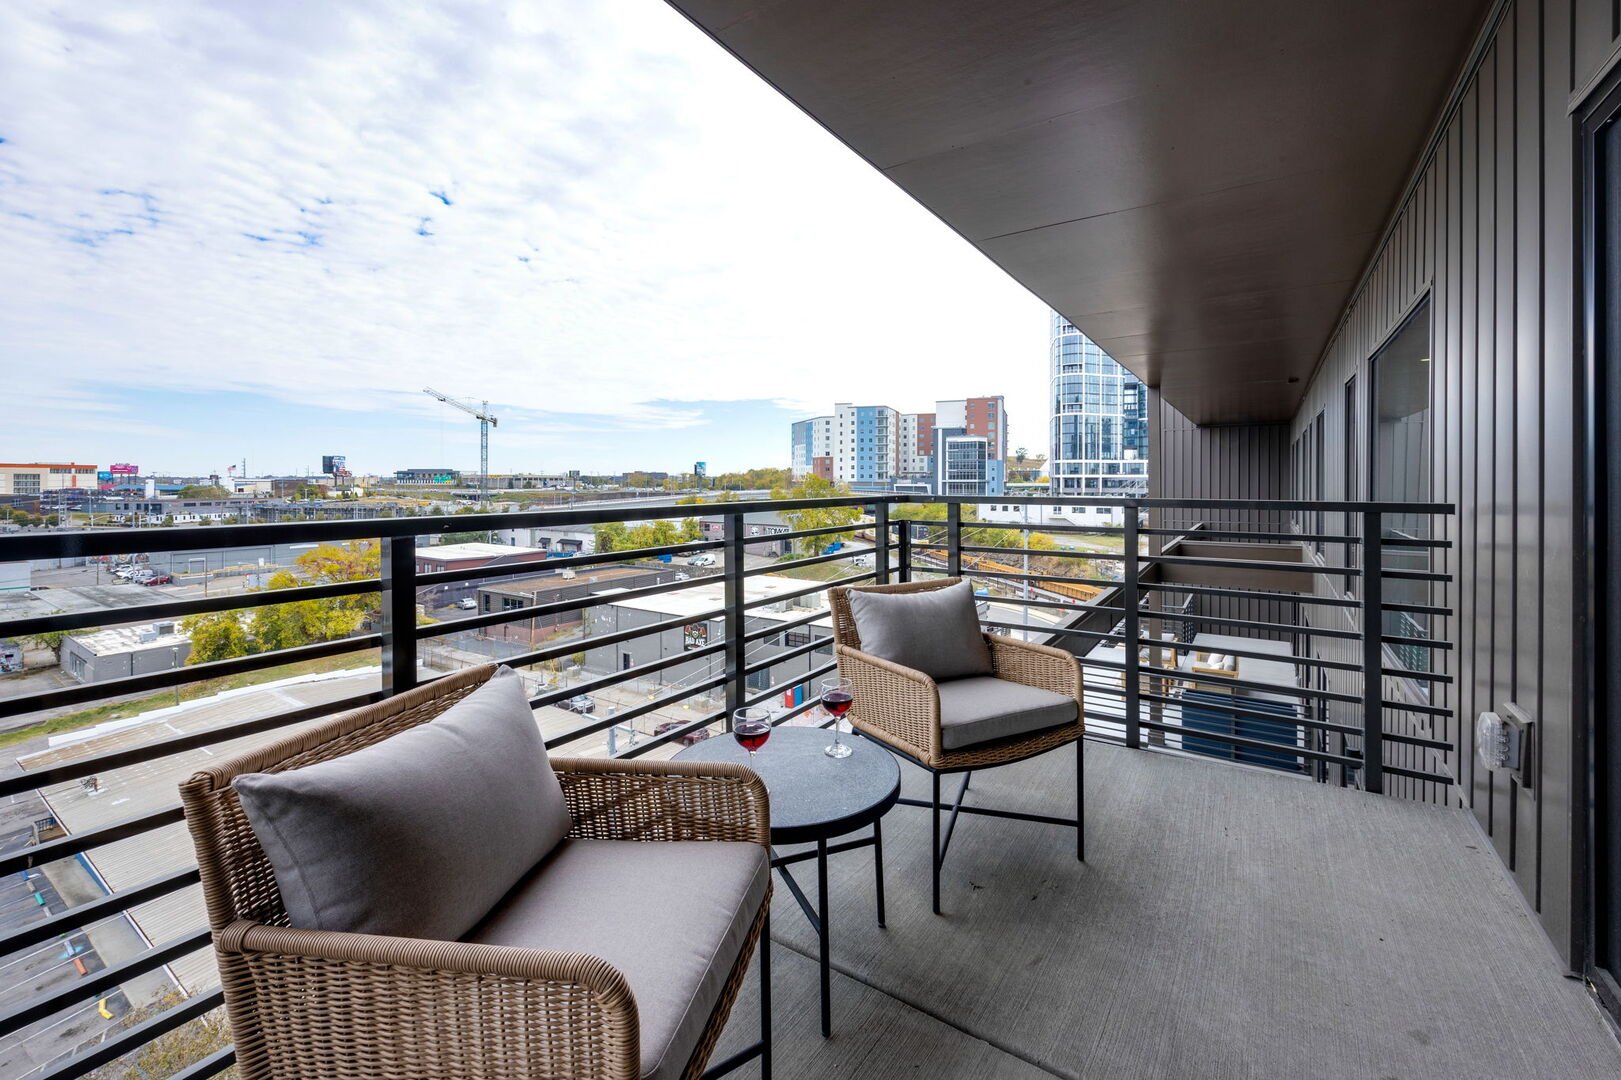 Upper Level: Primary bedroom with its own private balcony overlooking the Nashville skyline.